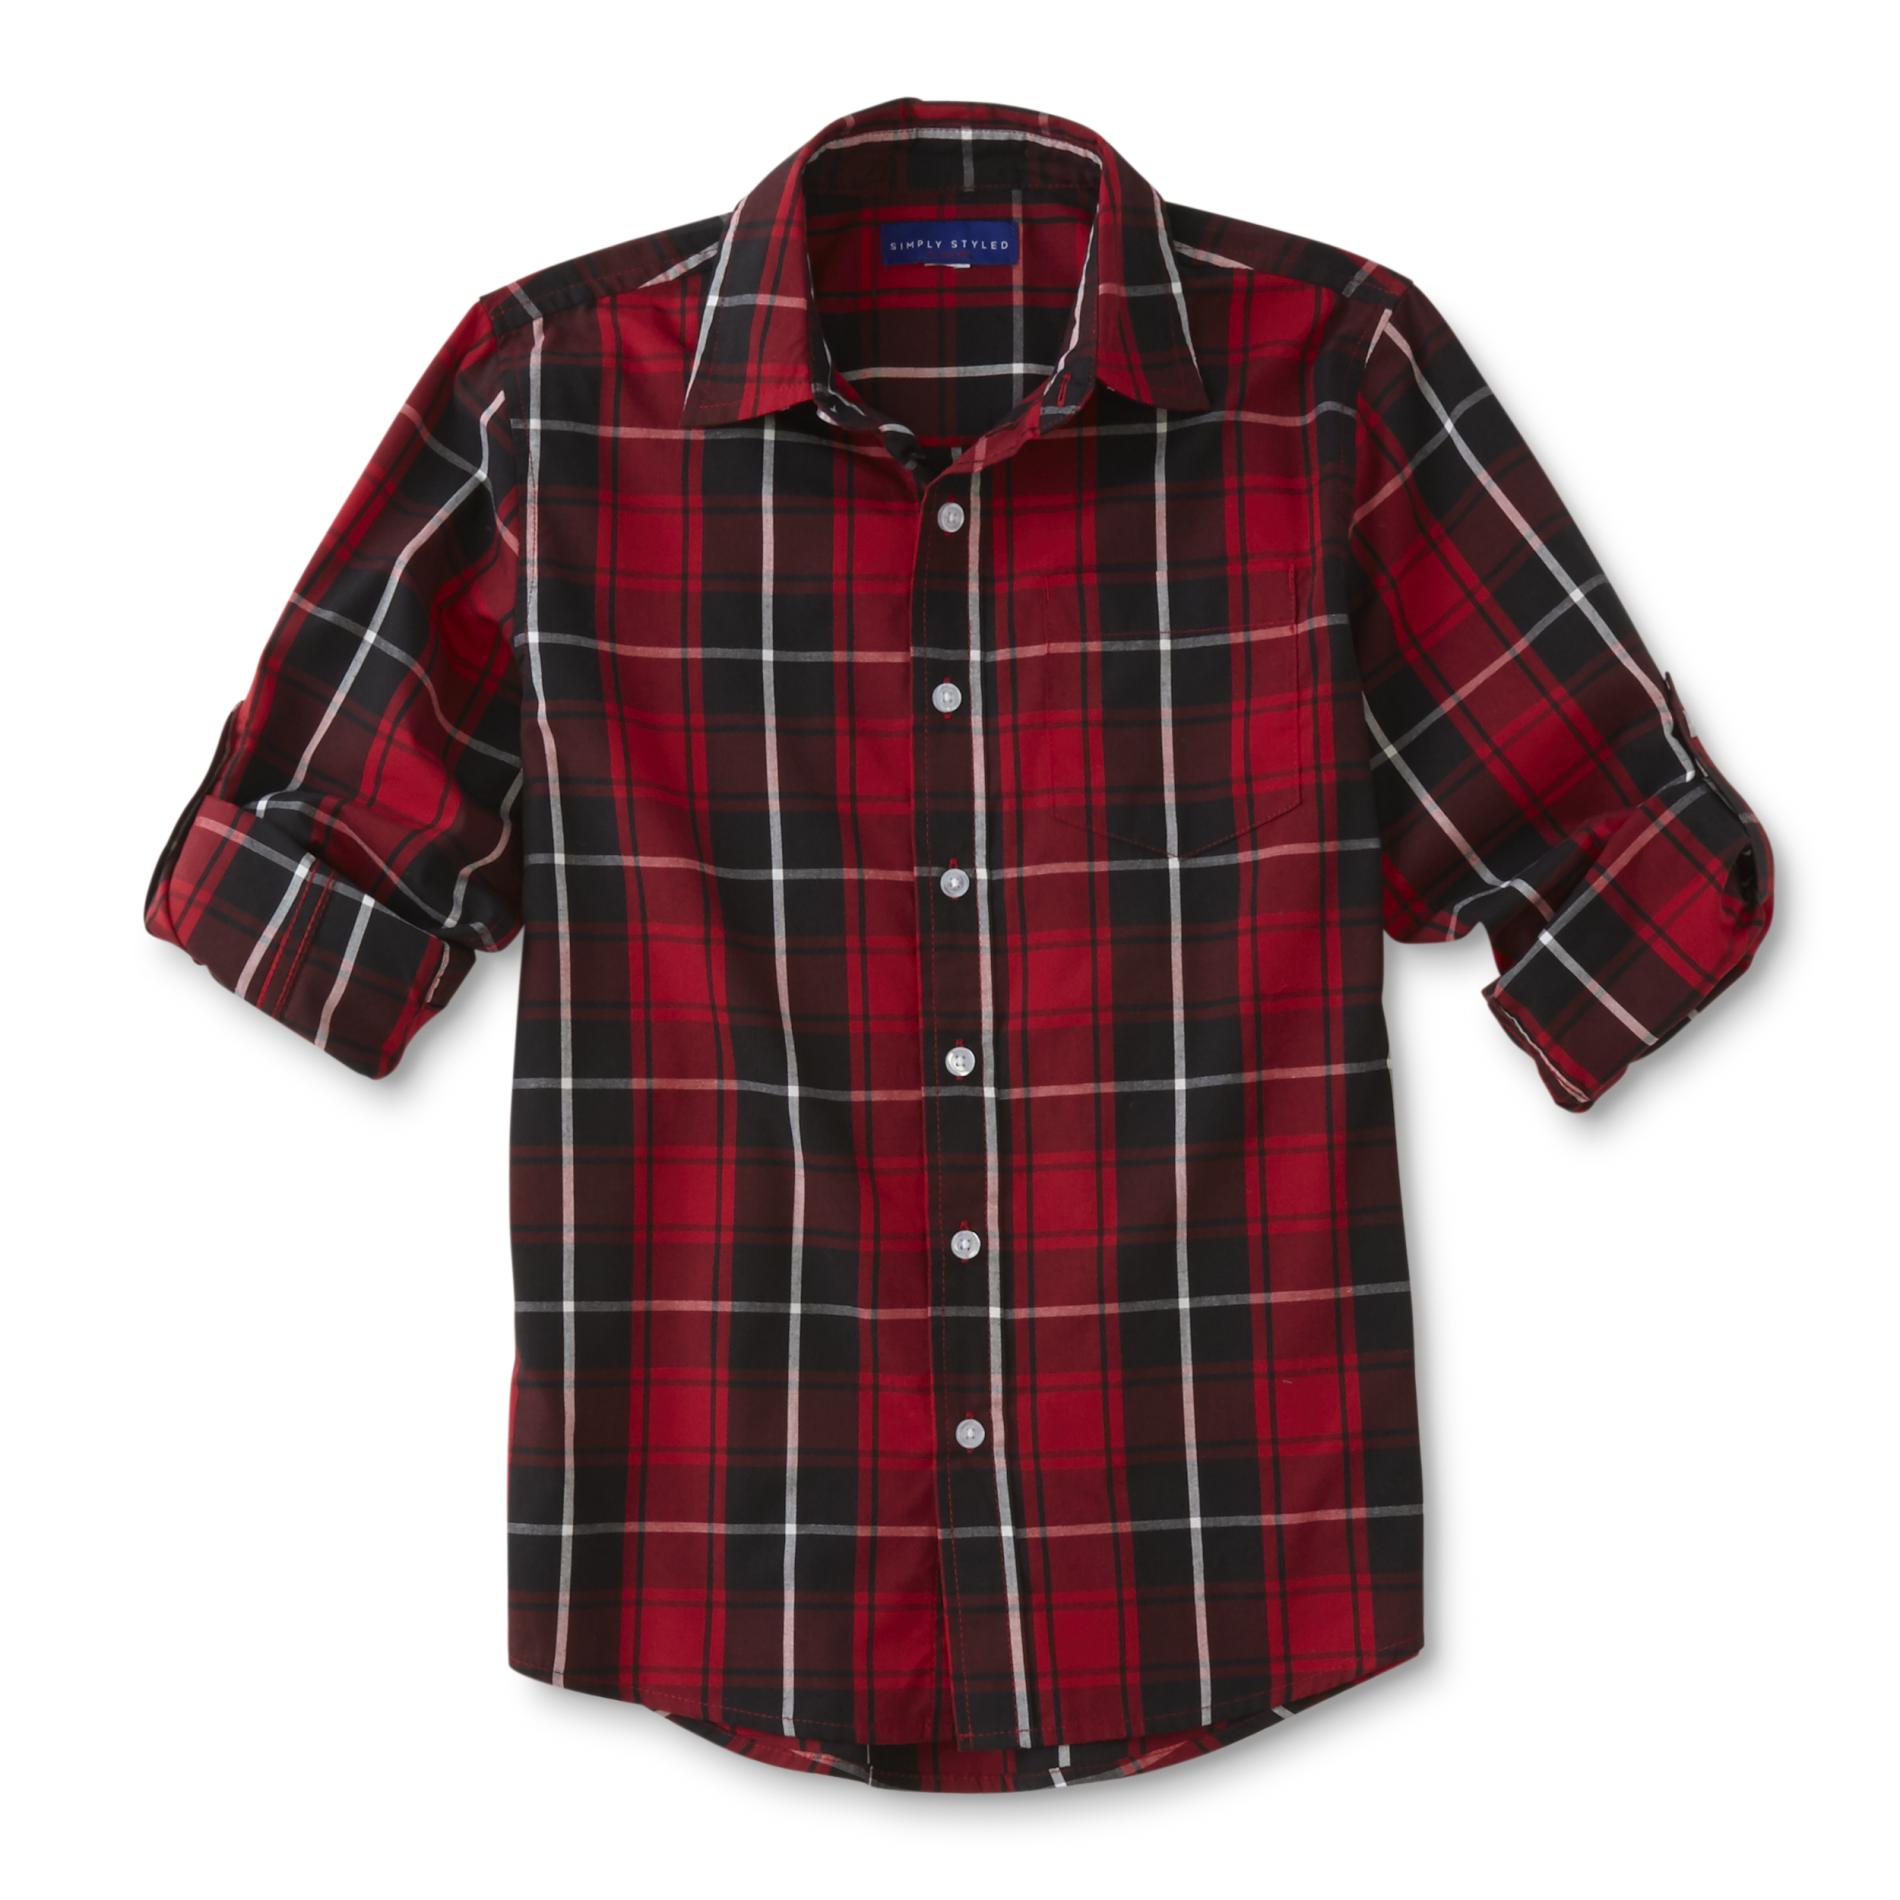 Simply Styled Boys' Button-Front Shirt - Plaid